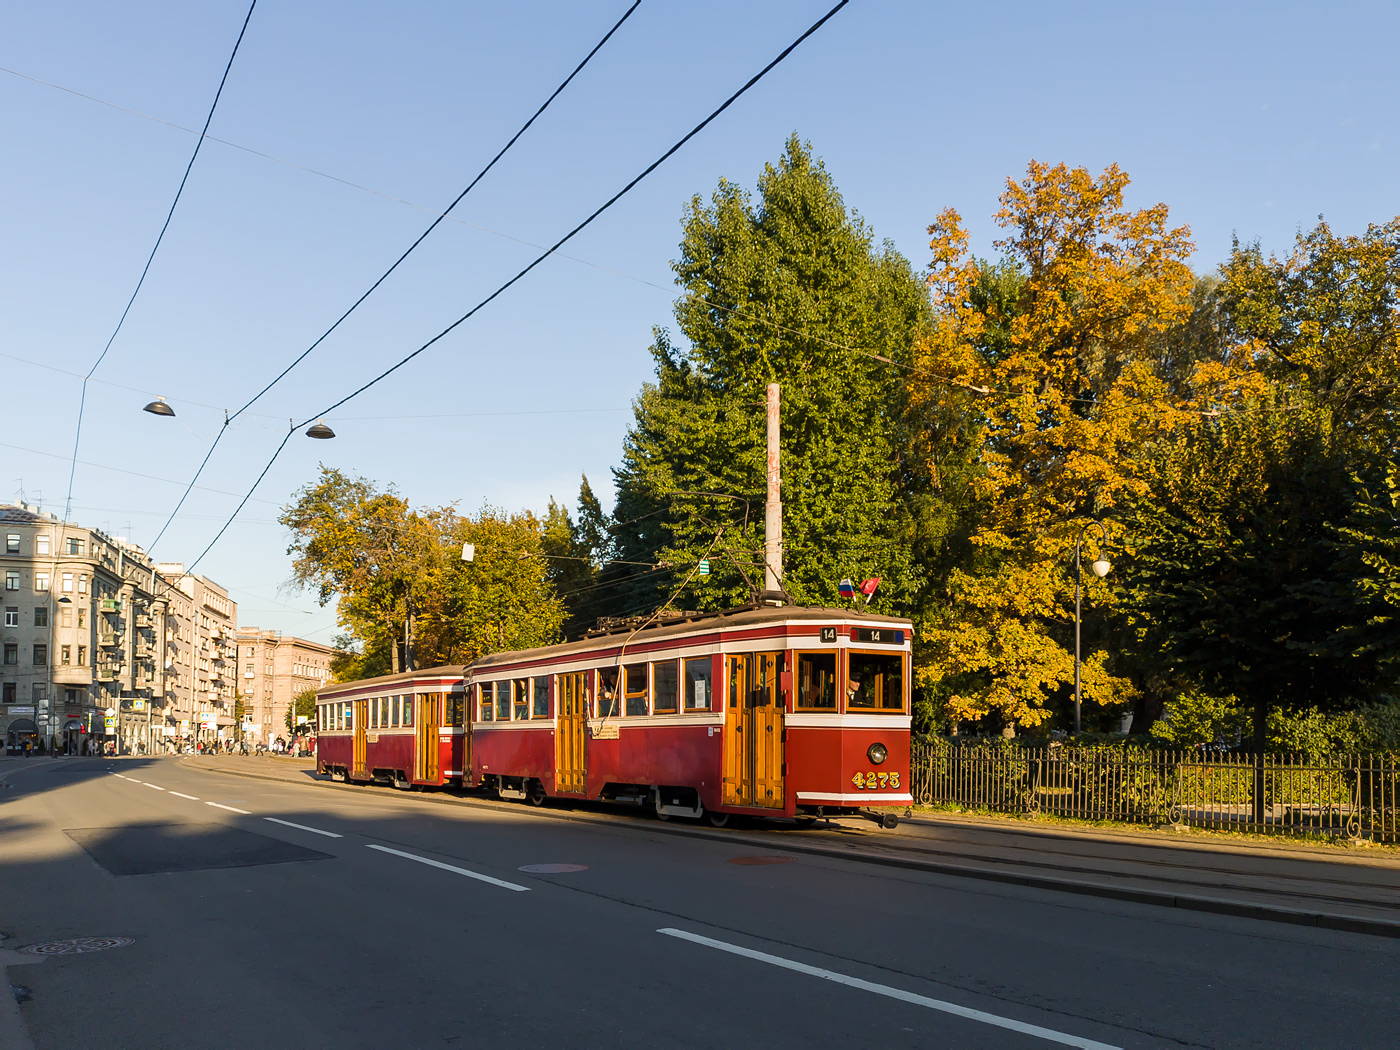 Petrohrad, LM-33 č. 4275; Petrohrad — Exhibition of wagons for the 115th anniversary of the tram